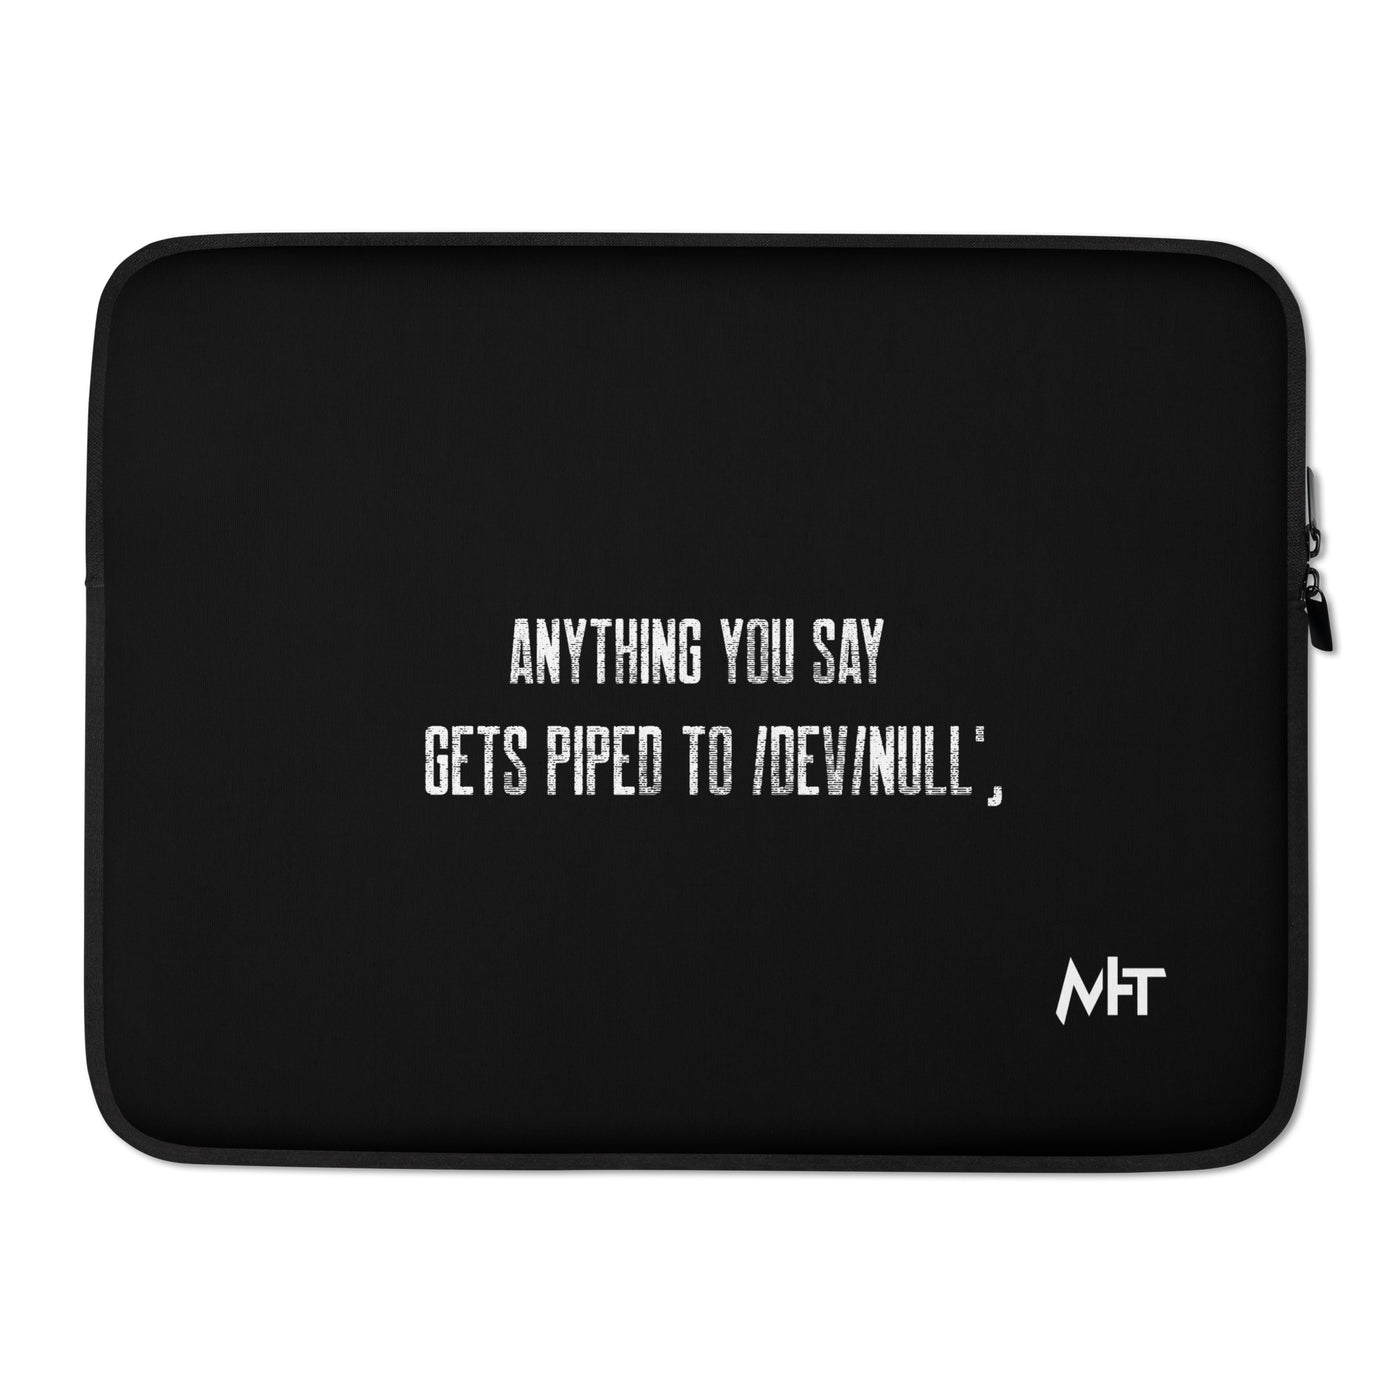 Anything you say Gets piped to devnull V1 - Laptop Sleeve